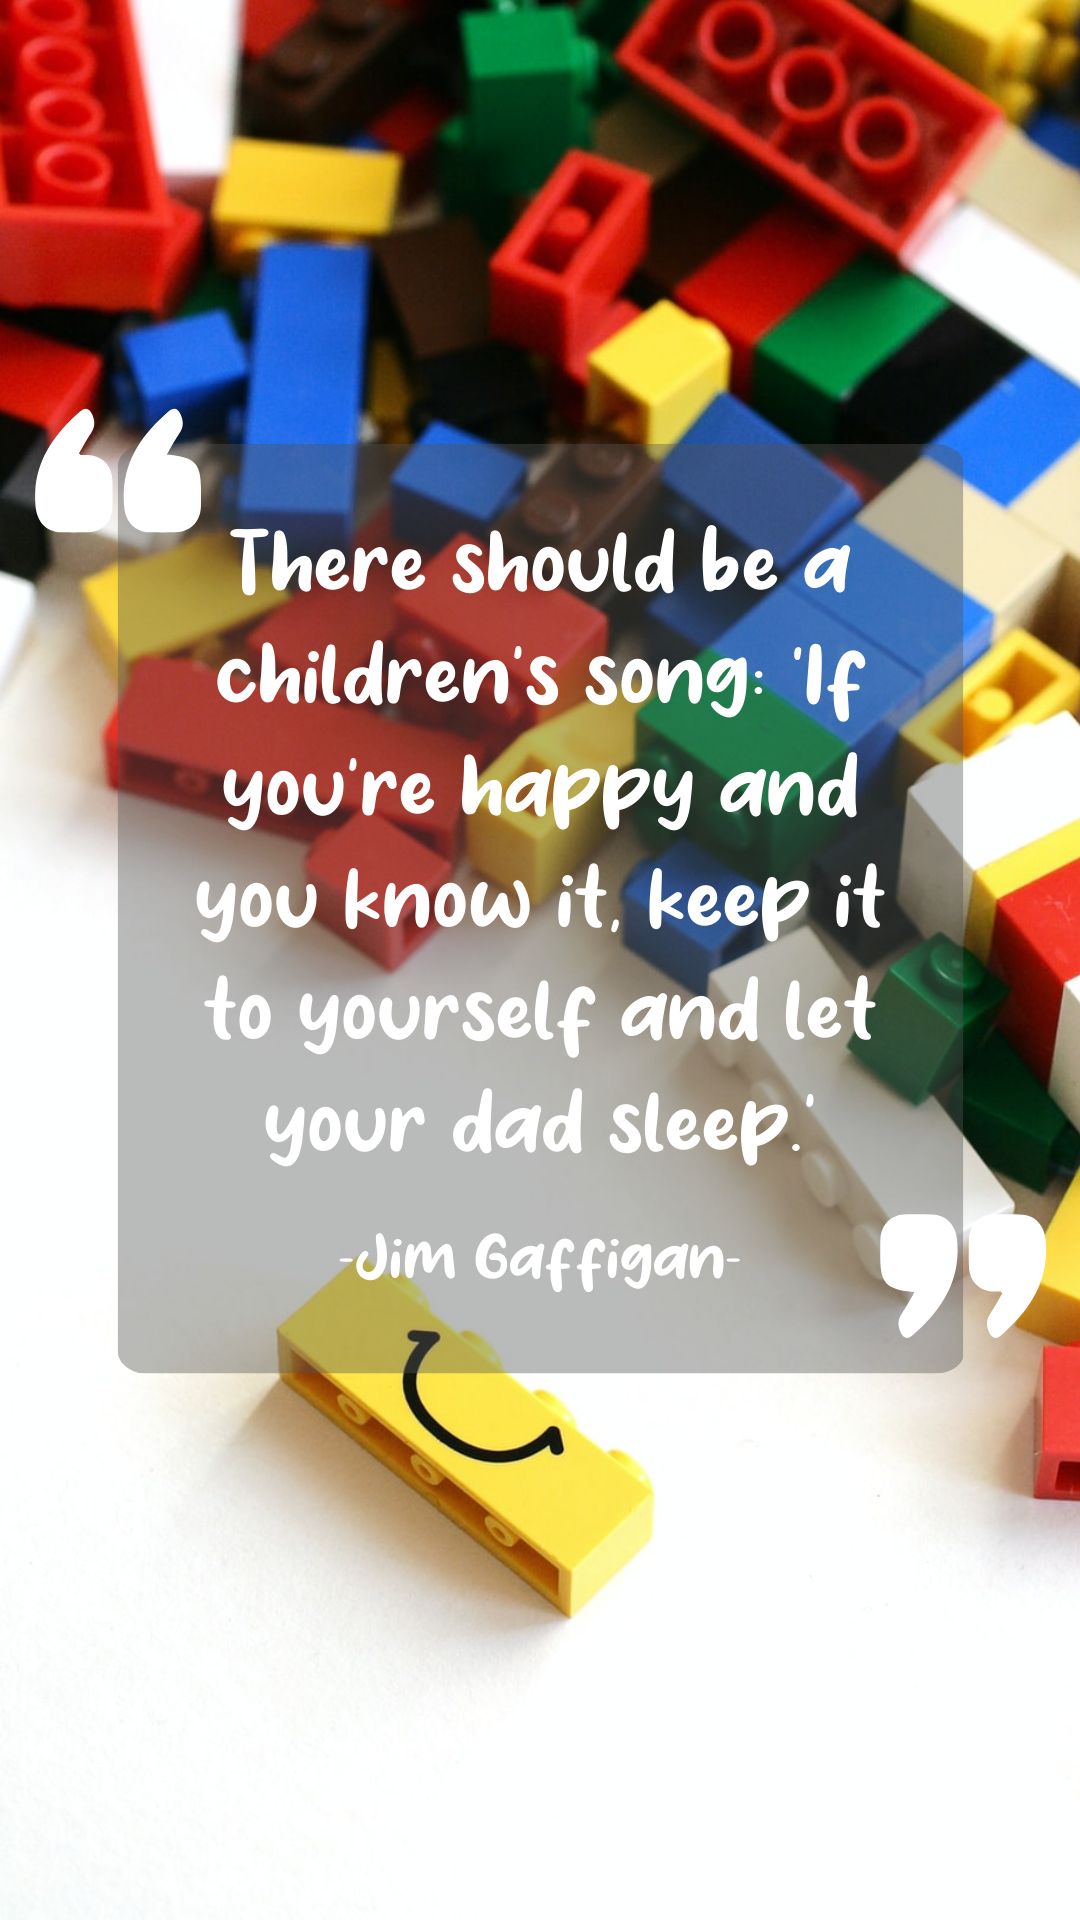 Jim Gaffigan - There should be a children’s song: ‘If you’re happy and you know it, keep it to yourself and let your dad sleep.